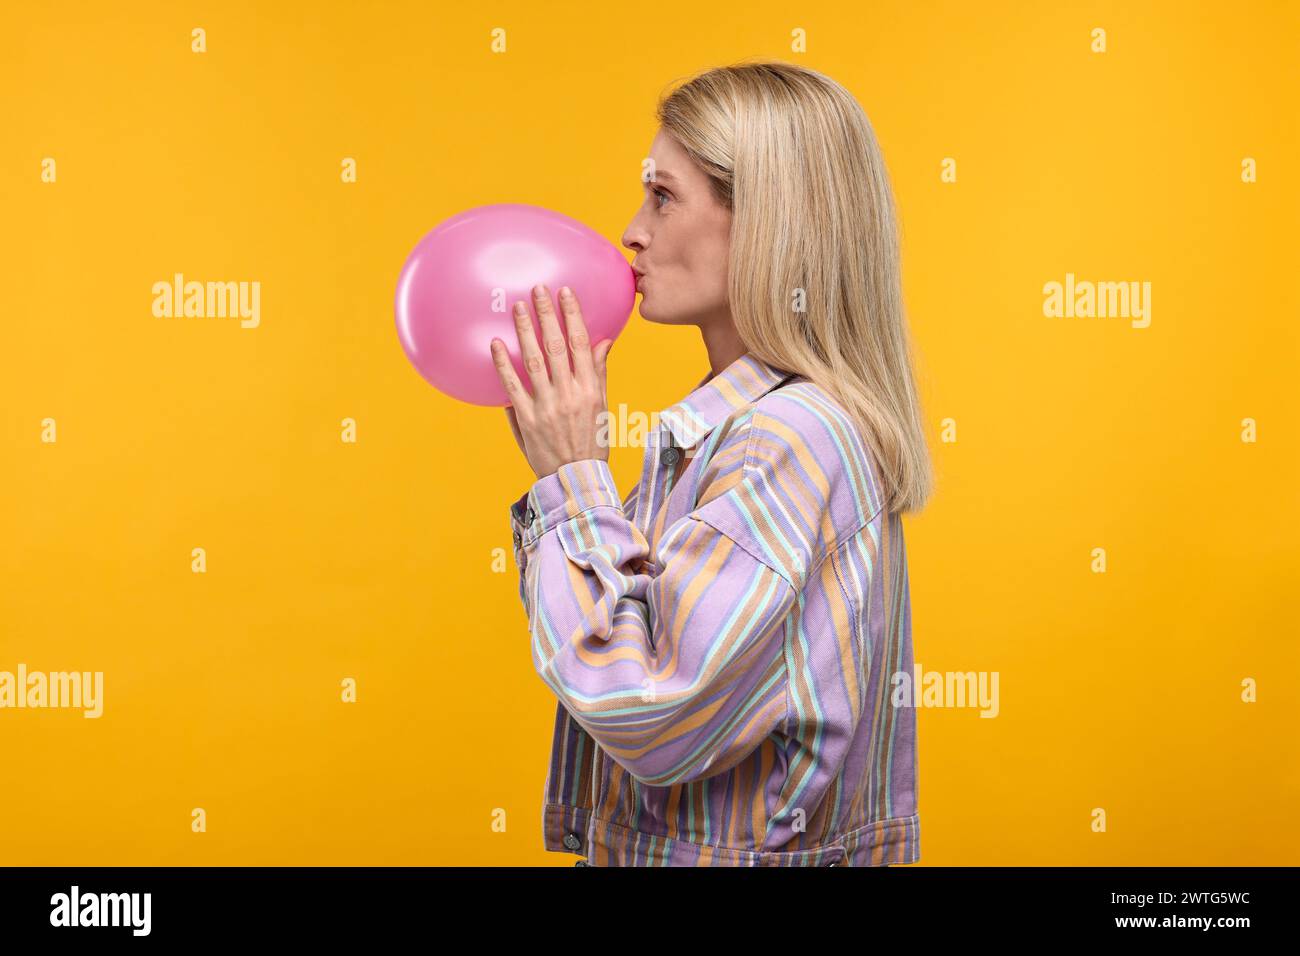 Woman blowing up balloon on yellow background Stock Photo